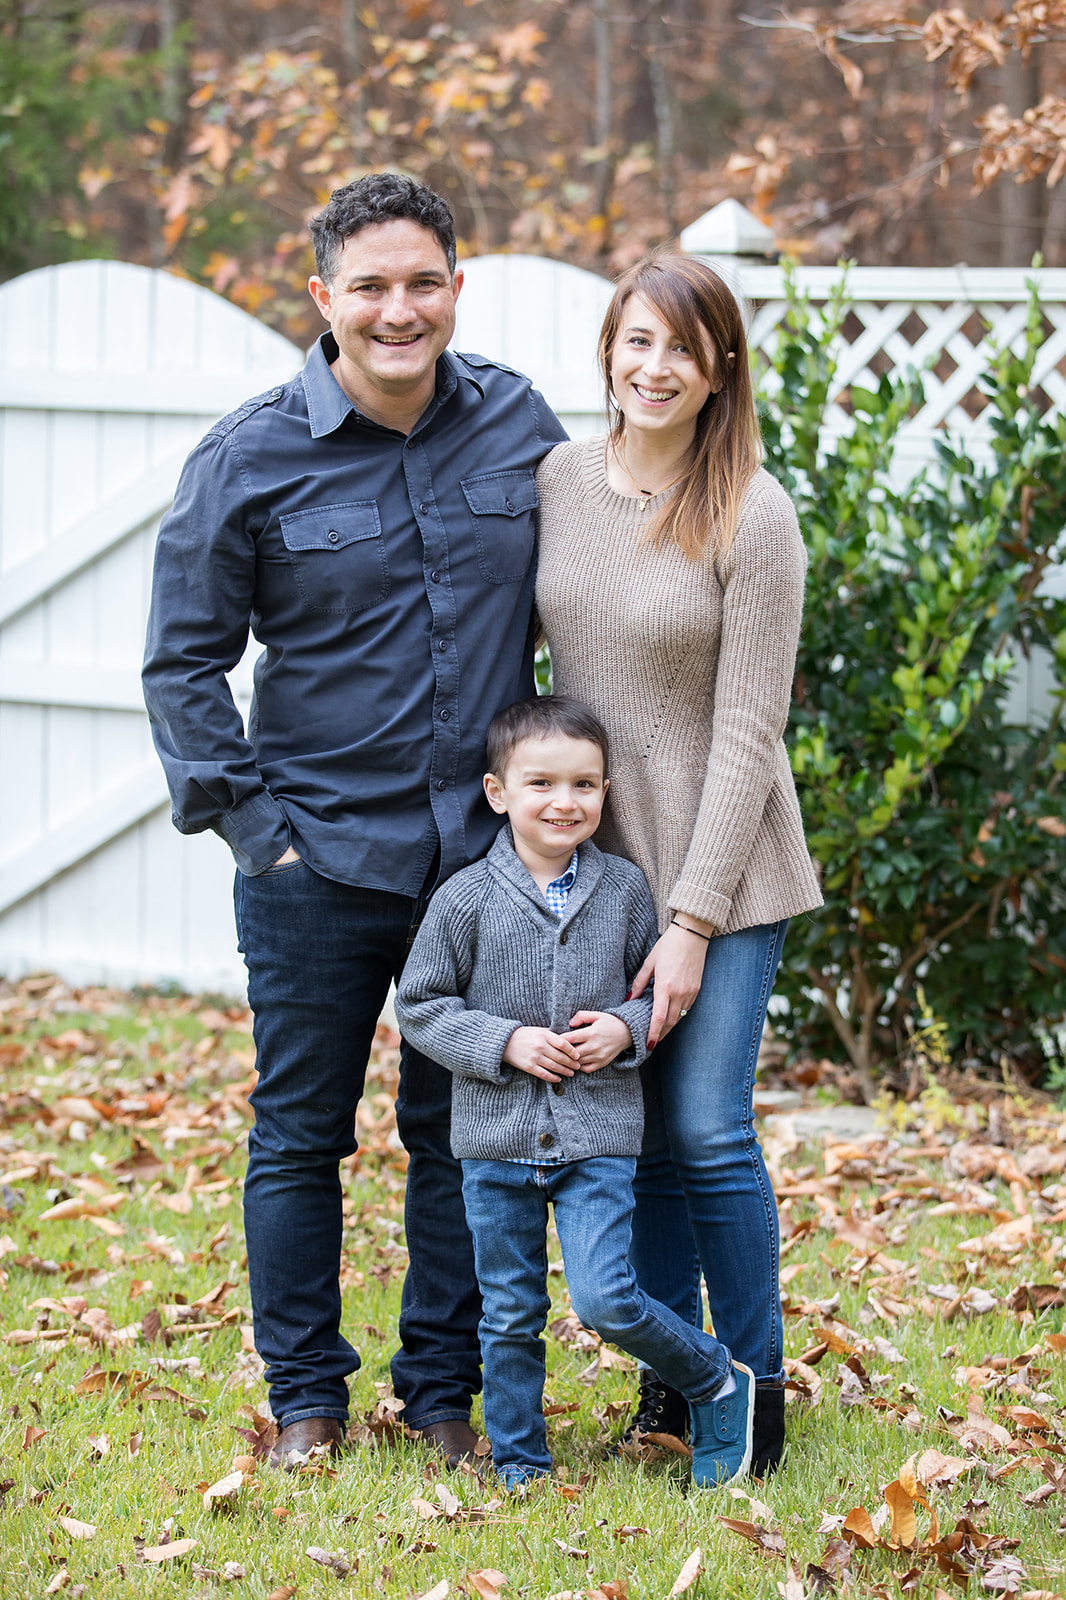 Lifestyle portraits: New home, new beginnings. By Calm Cradle Photo & Design (Chapel Hill, NC)